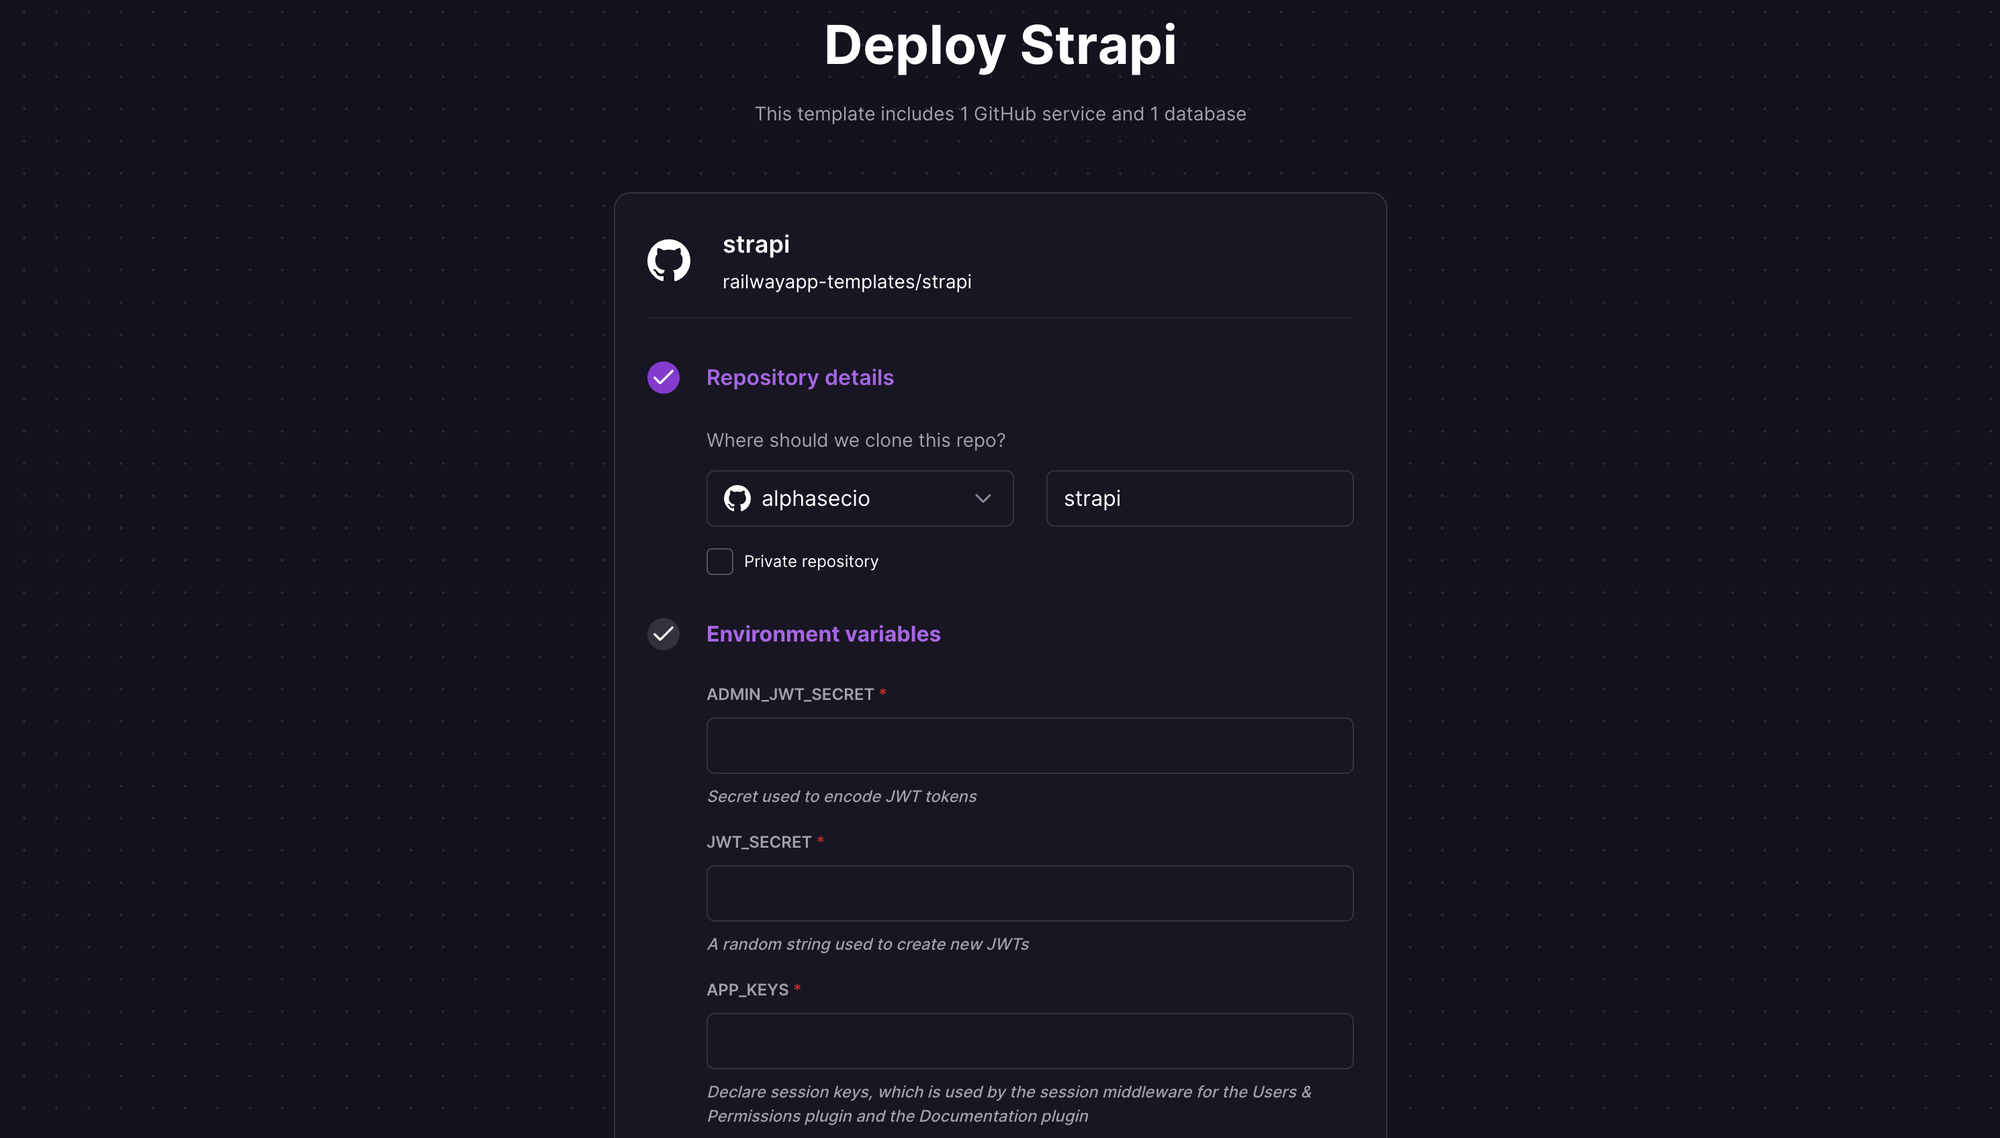 Deploy Strapi using the one-click starter on Railway